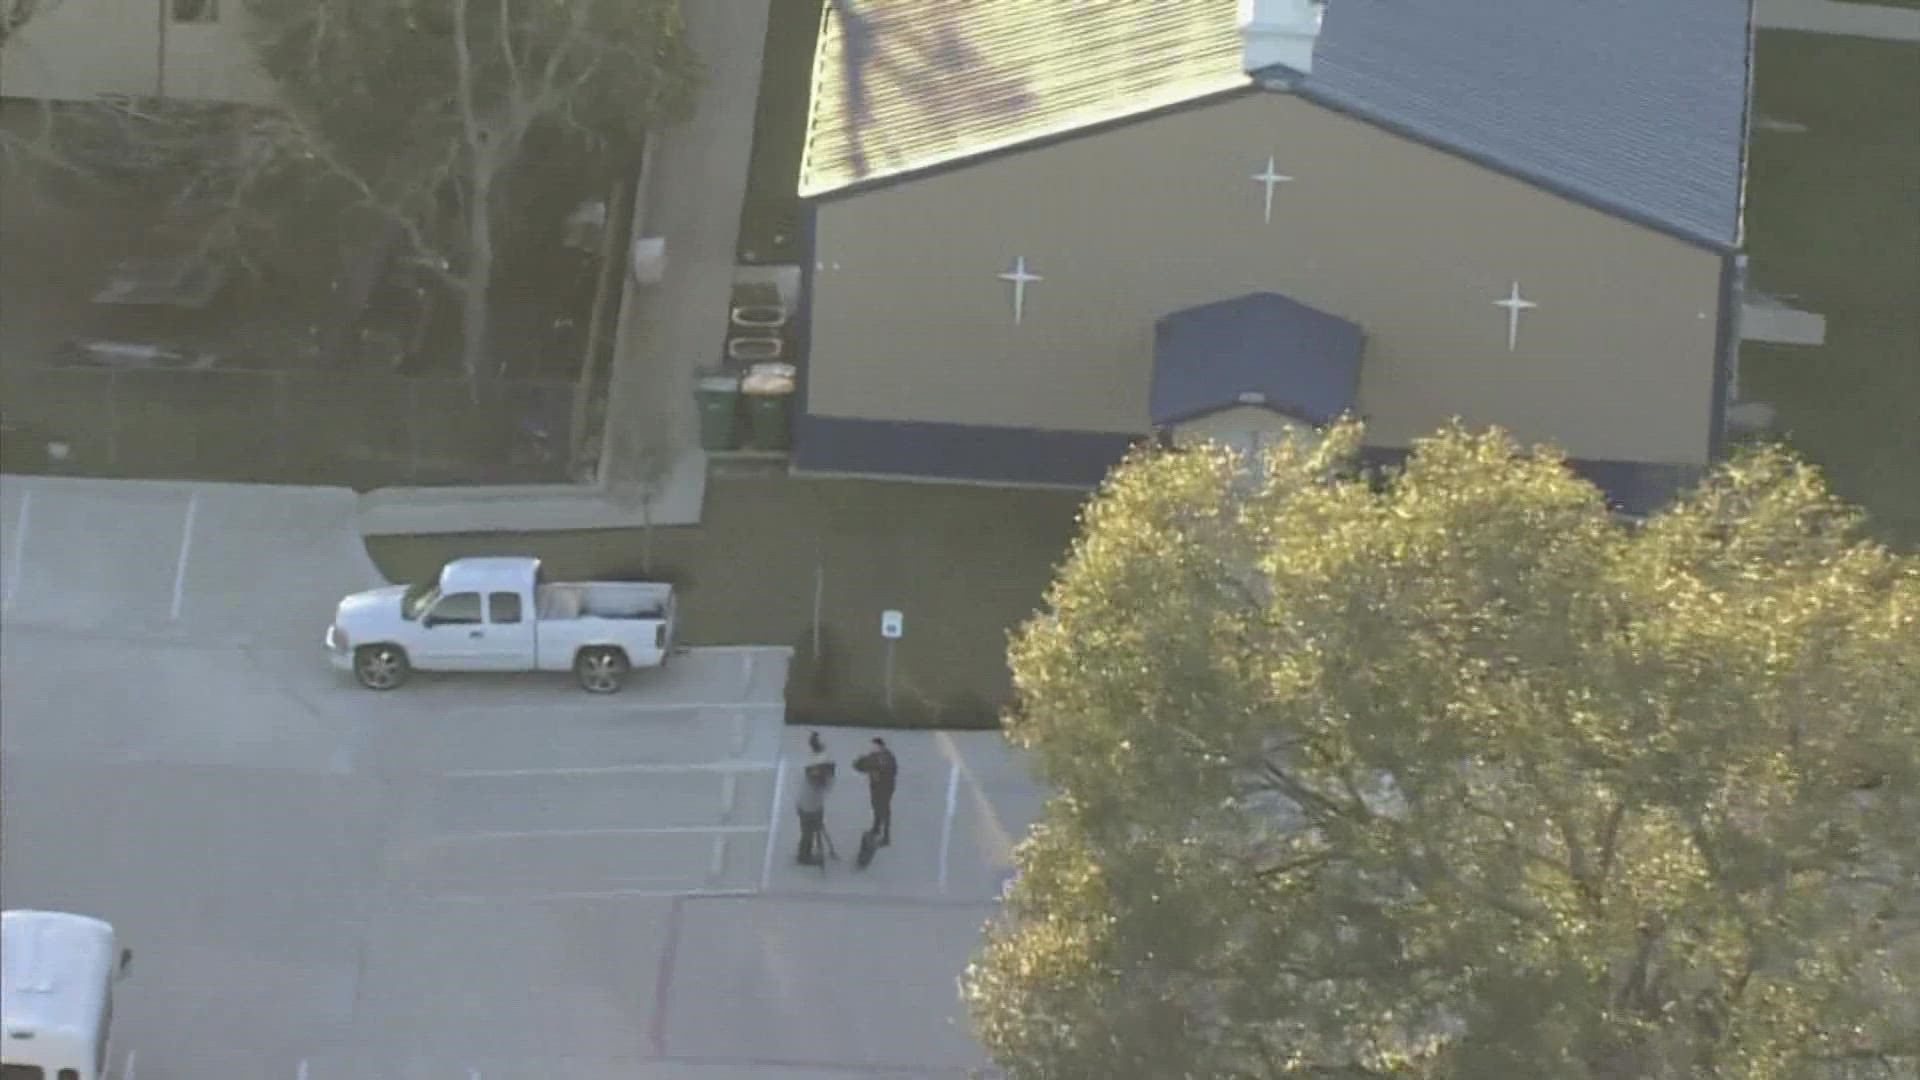 Police think the shooter was targeting a property near the Hopewell Community Church.